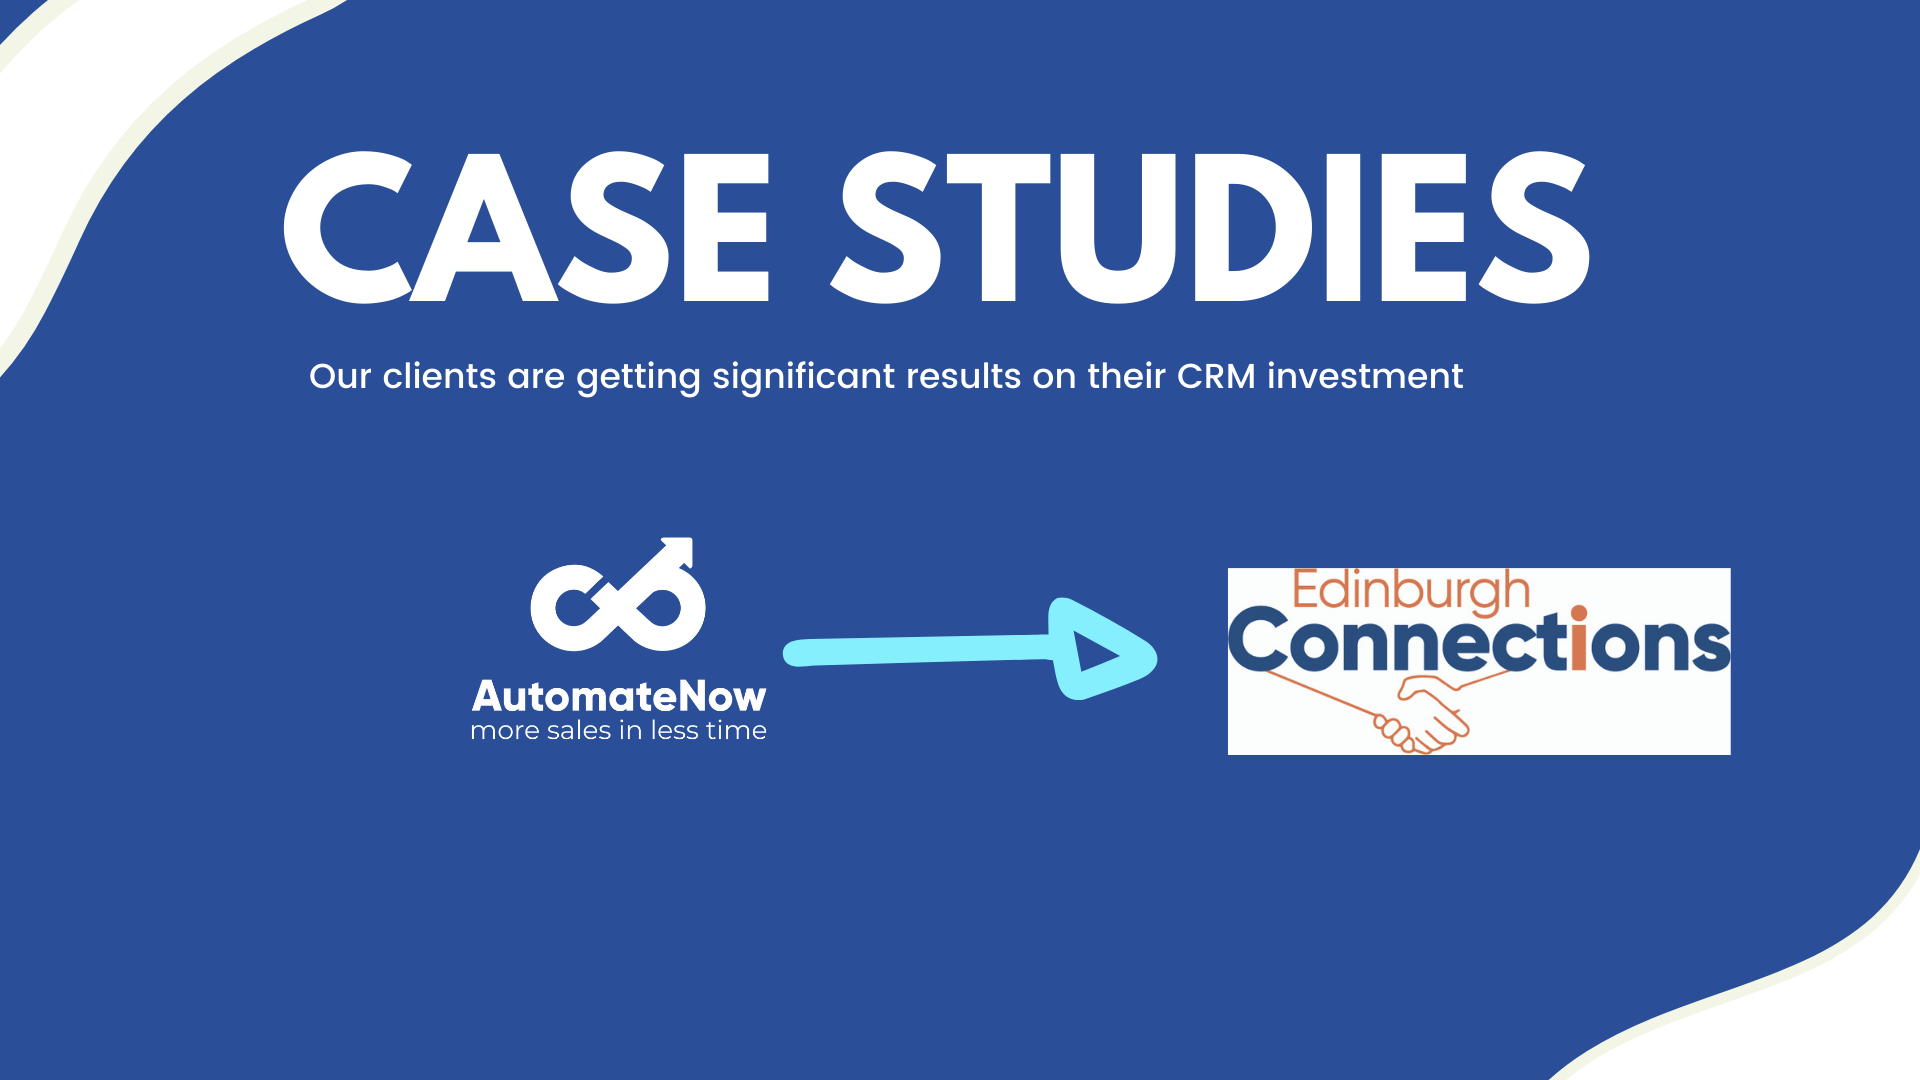 Edinburgh Connections secured high renewal rate [Case Study]